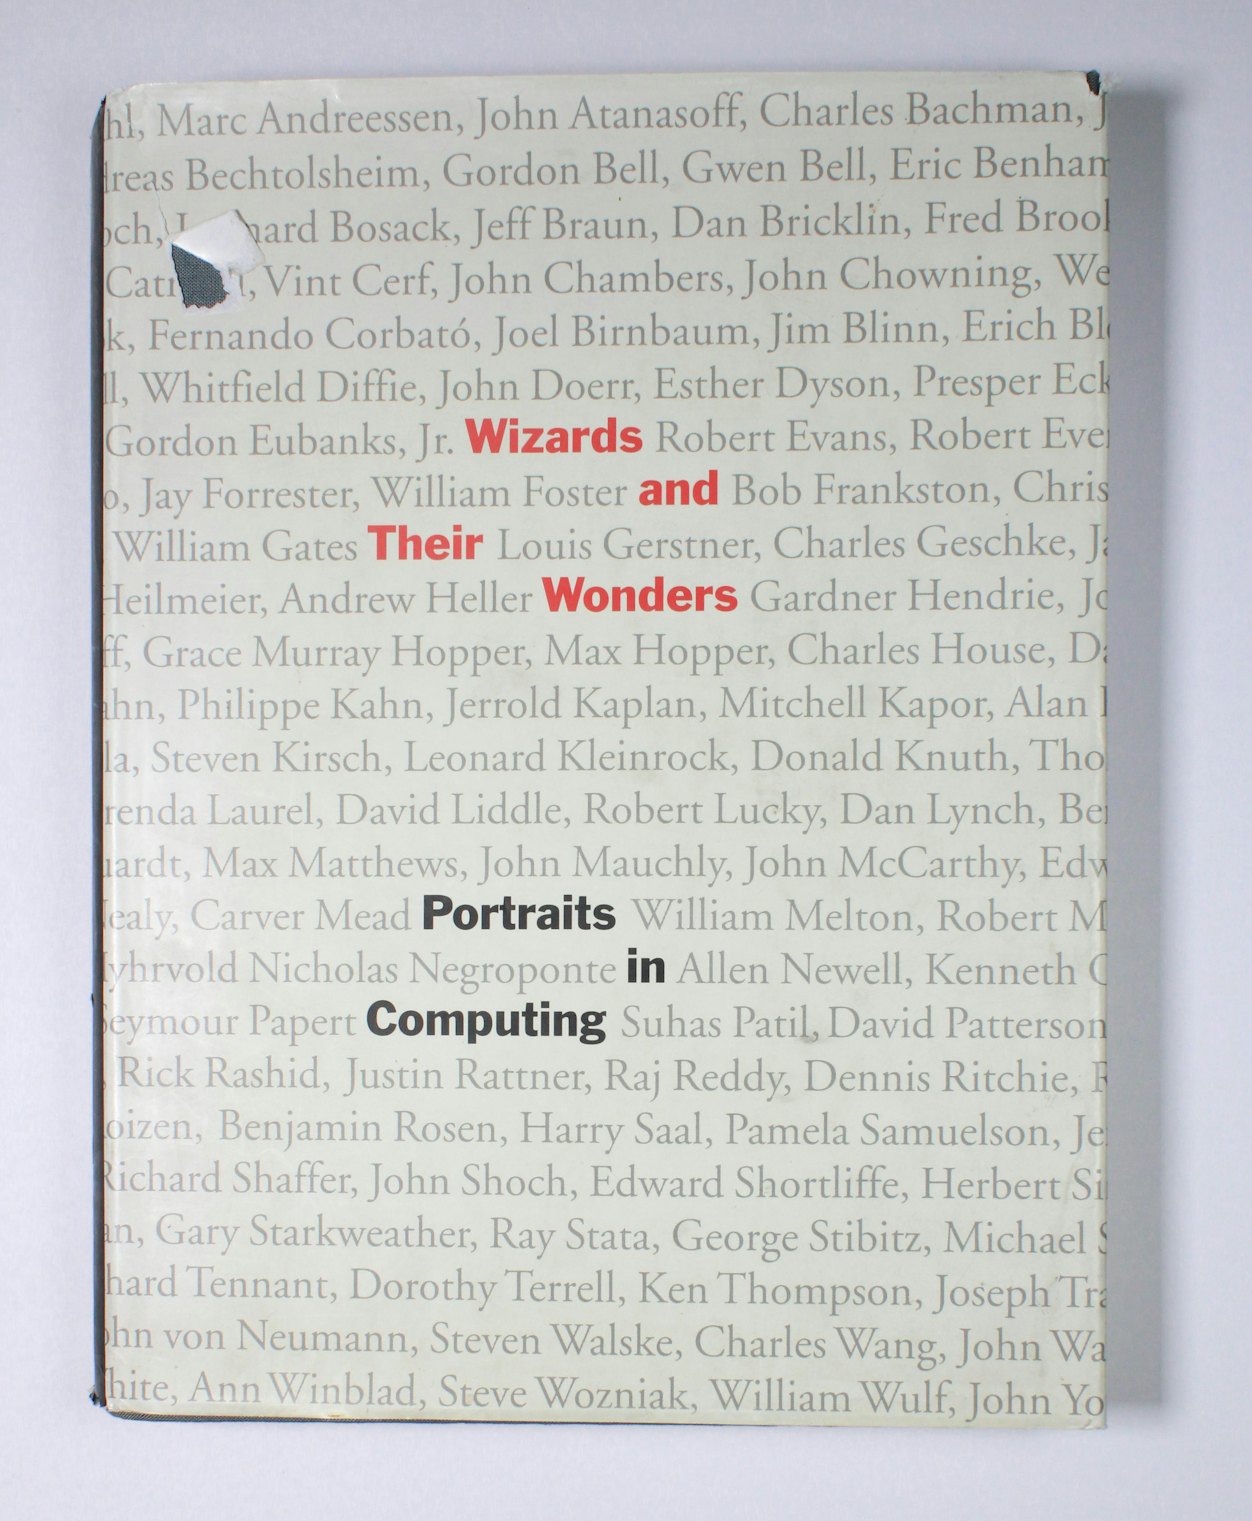 Wizards and Their Wonders: Portraits in Computing